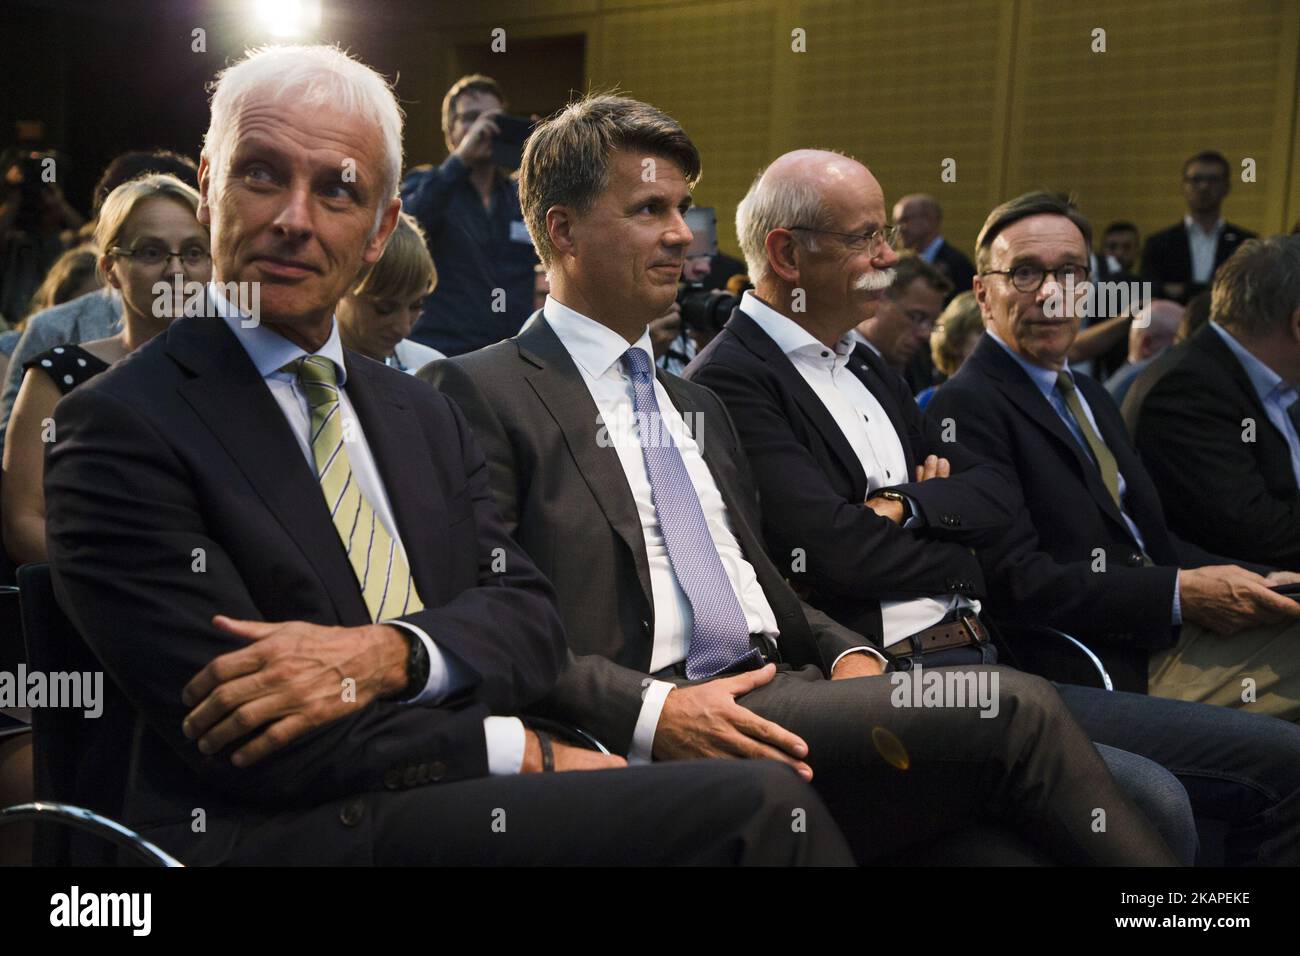 (L-R) CEOs of Volkswagen Matthias Mueller, BMW Harald Krueger, Daimler AG Dieter Zetsche and President of German Automobile Industry Union (VDA) Matthias Wissmann are pictured during a news conference after the Diesel-Summit at the Ministry for Transportation and Digital Infrastructure in Berlin, Germany on August 2, 2017. (Photo by Emmanuele Contini/NurPhoto) *** Please Use Credit from Credit Field *** Stock Photo